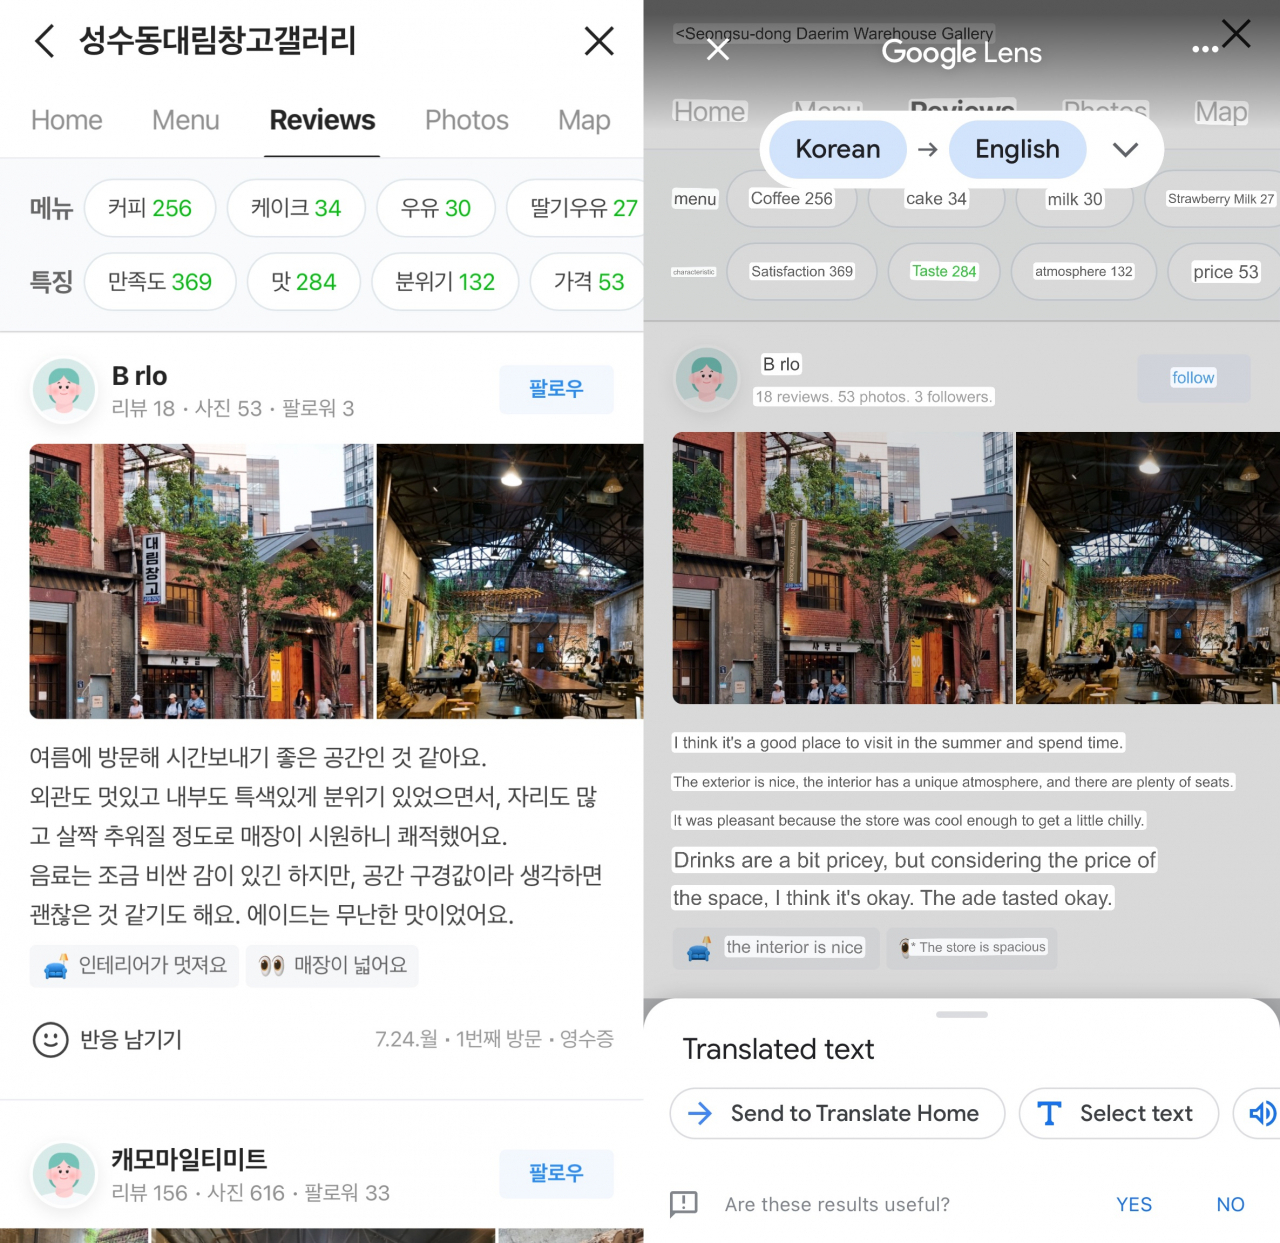 Menus and reviews in the multilingual versions of Naver Map(in the photo) and Kakao Map are left untranslated, prompting some users to take a screenshot and translate it separately in Google Lens.